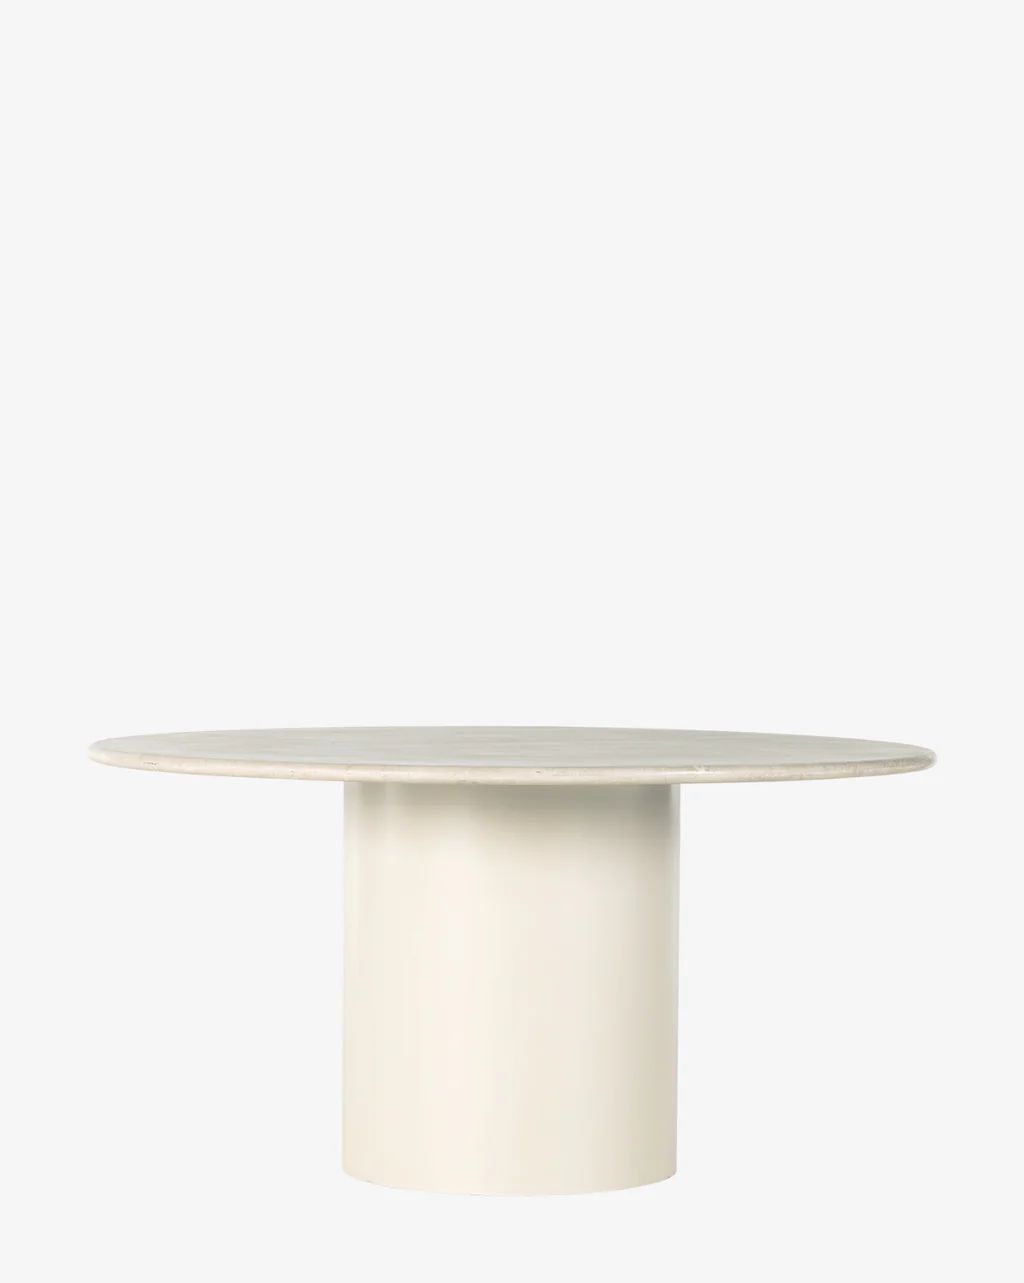 Giana Dining Table | McGee & Co.